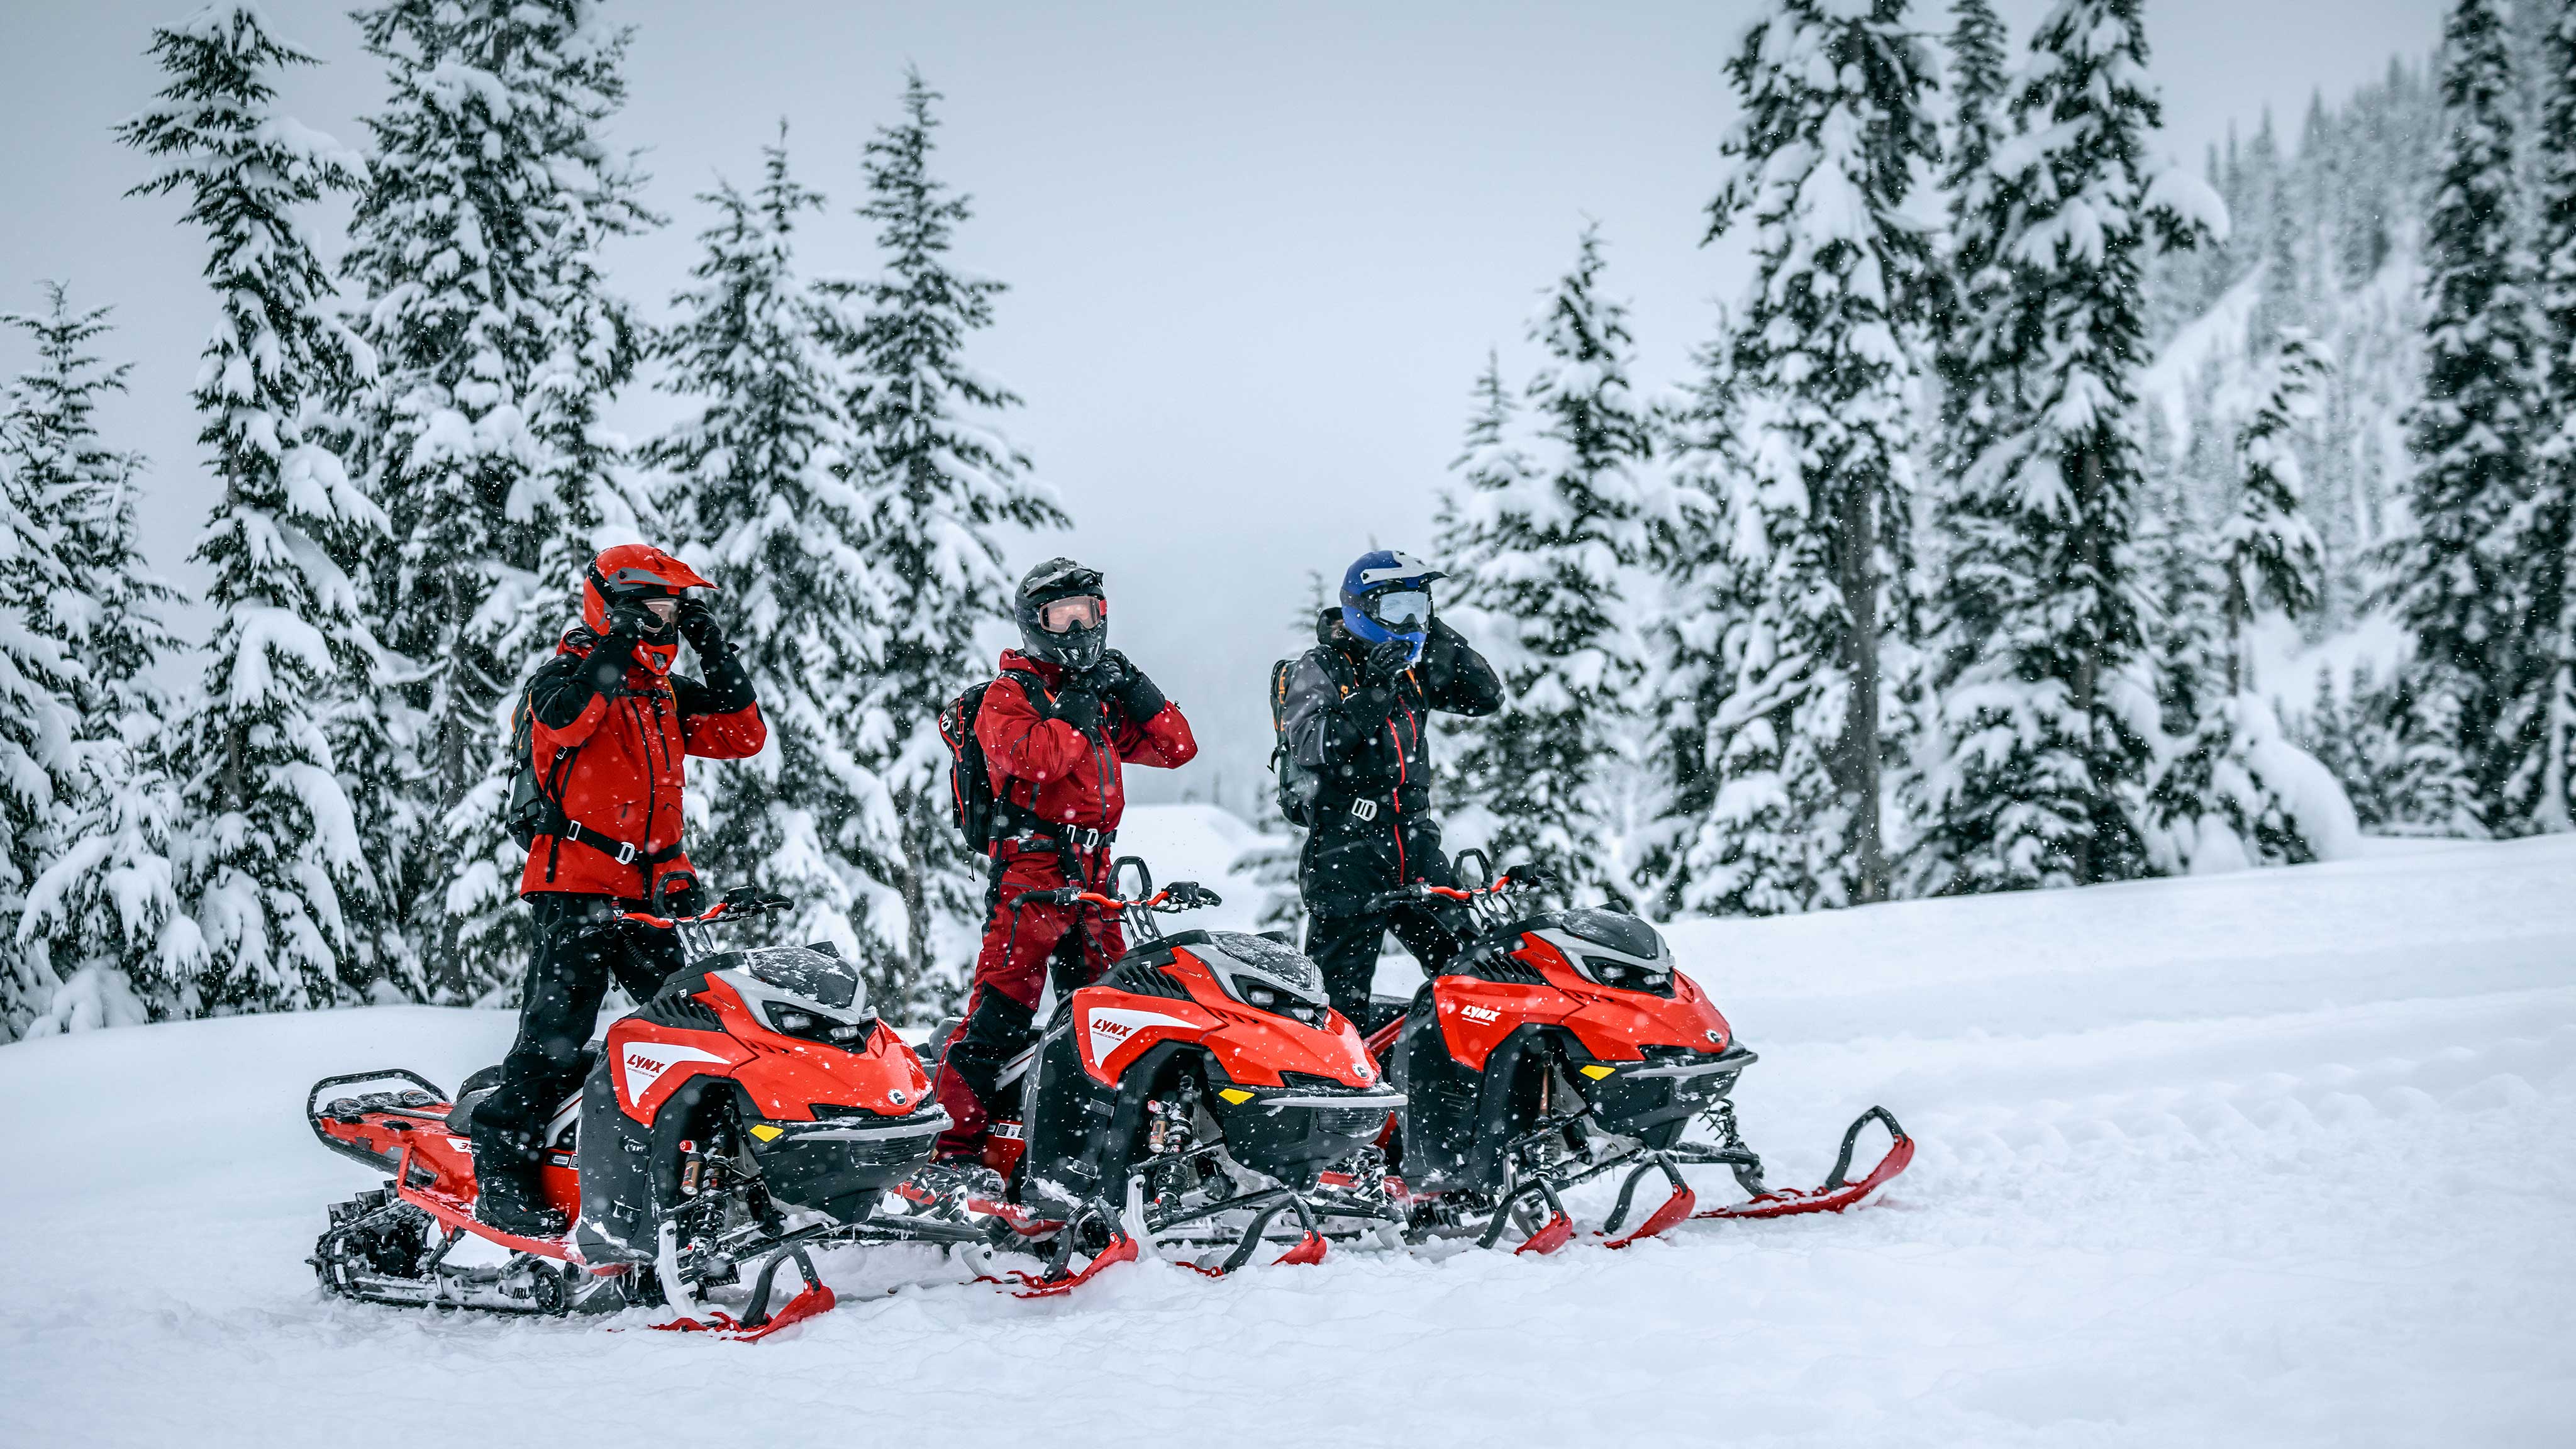 3 riders with their Lynx snowmobiles